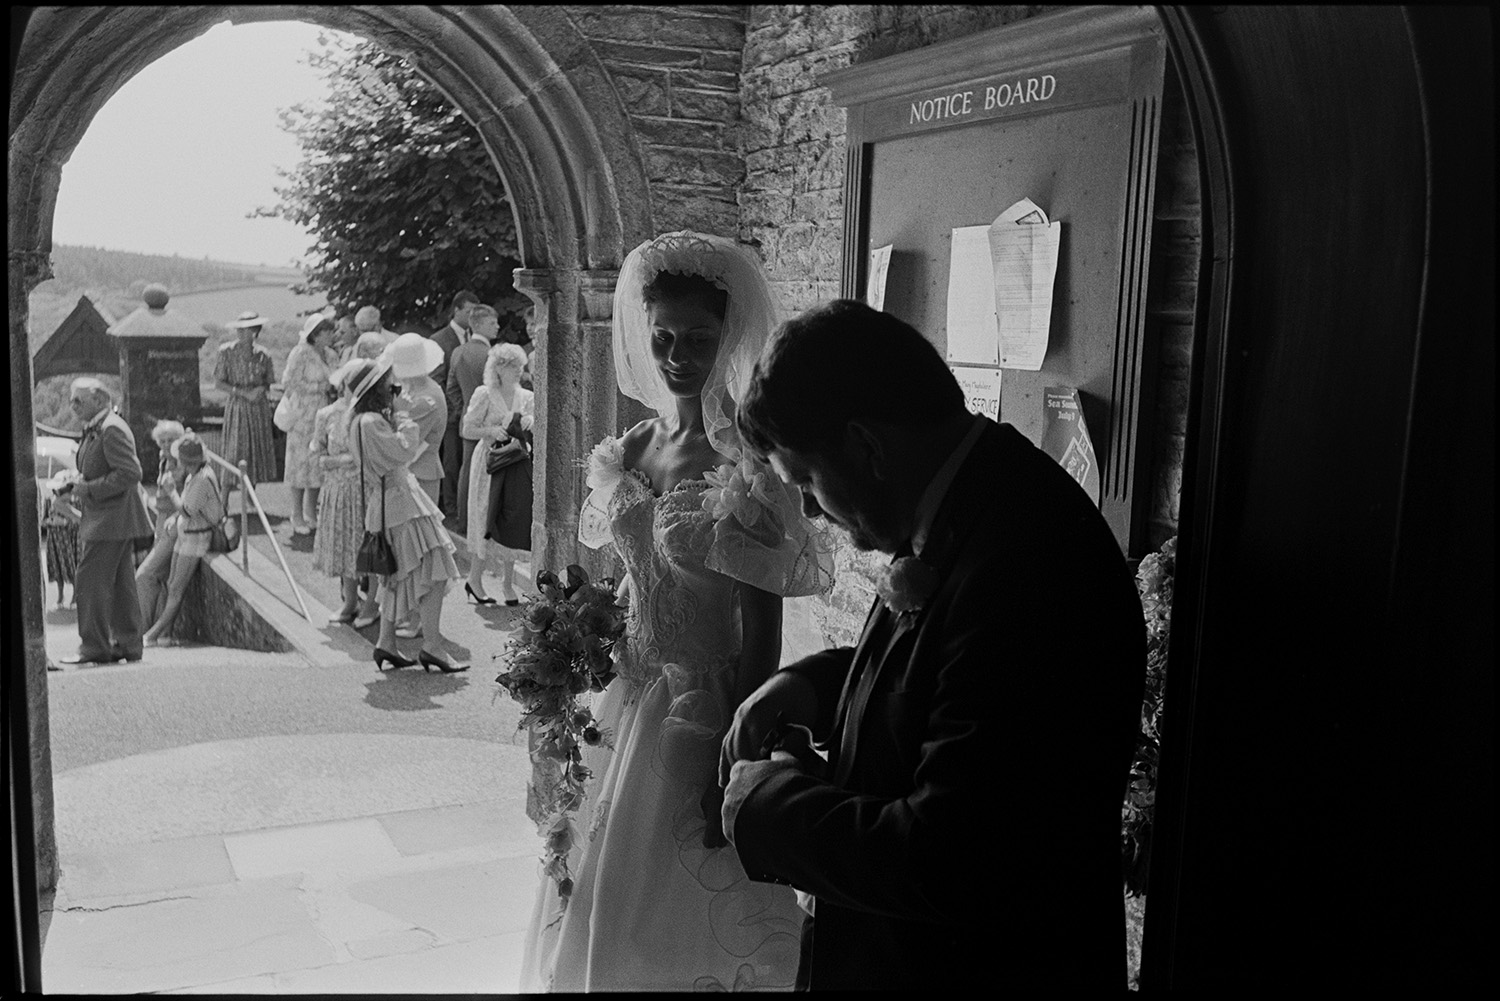 Wedding spectators, bride, groom, bridesmaids being photographed Photographer changing film.
[A bride and man standing in the porch of the Church of St Mary Magdalene, Chulmleigh. The bride is holding a bouquet of flowers and watching the man changing a film in his camera. Guests can be seen waiting outside the church.]